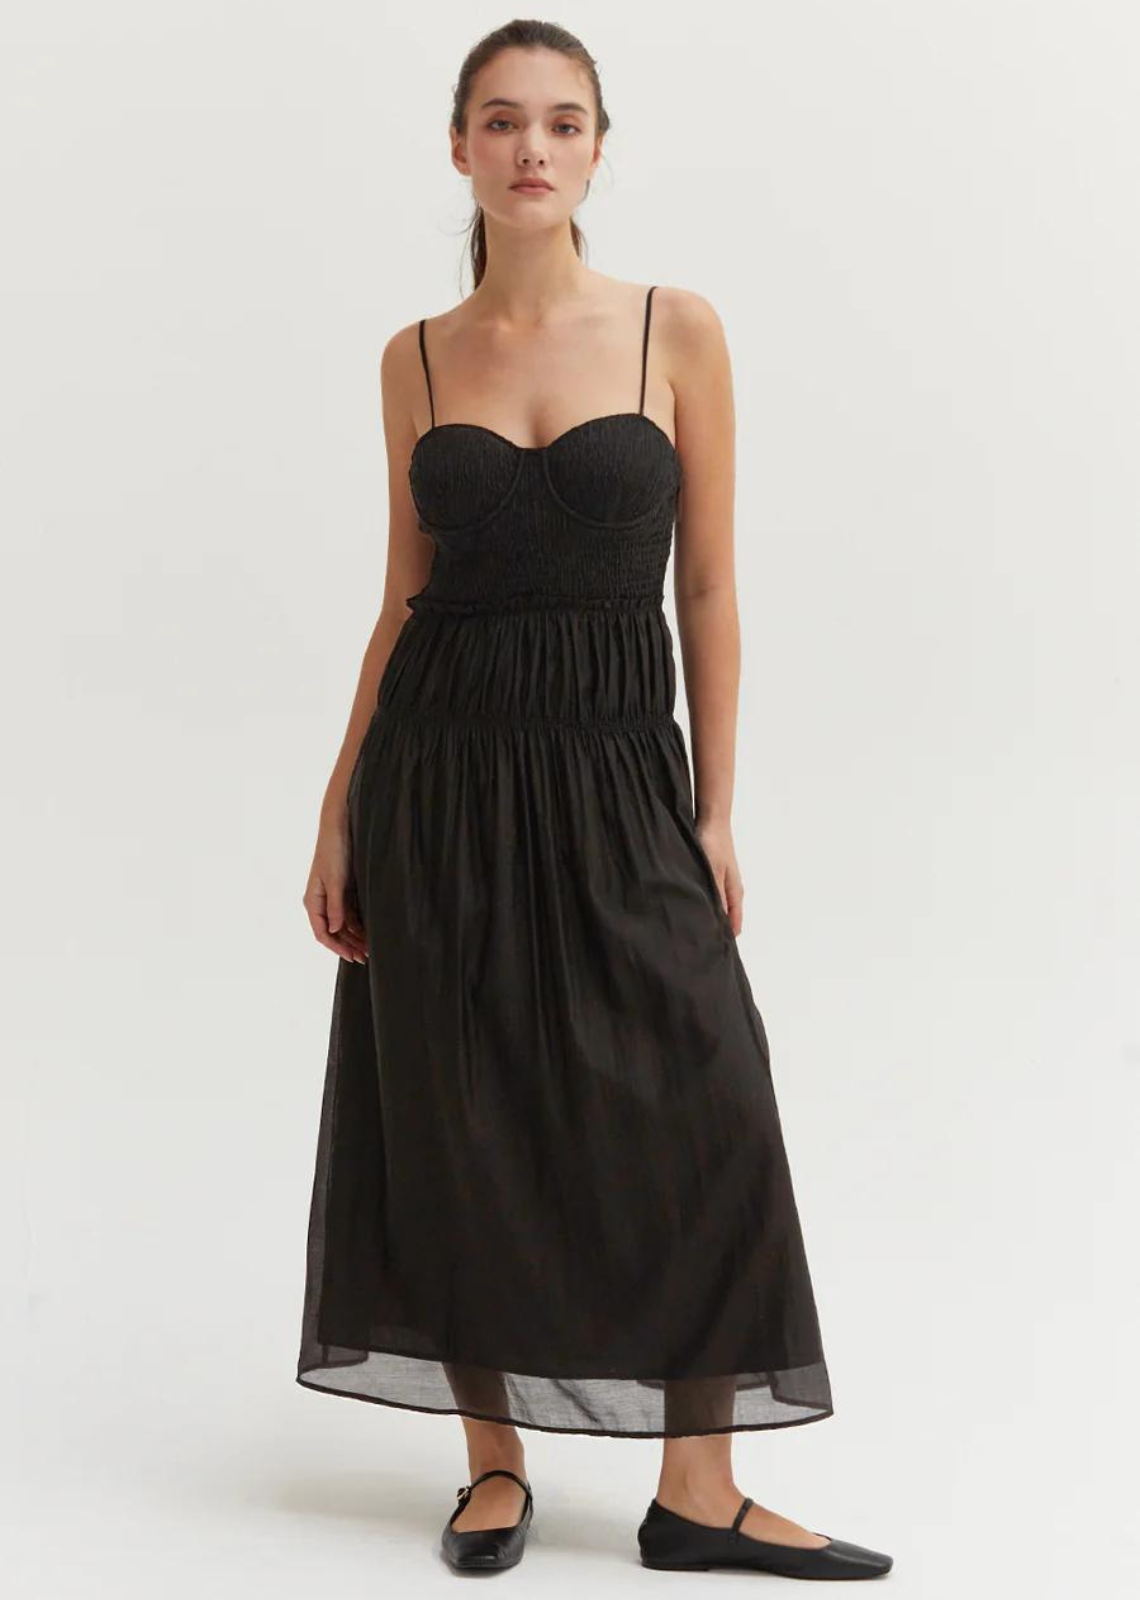 Lucy Tencel Blend Midi Dress- Black.Made with airy and semi sheer Tencel-blend, the Lucy Tencel Blend Midi Dress features smocked bustier with bra cup, adjustable spaghetti straps, side invisible zipper closure, and elasticized ruffle detail at waistline.